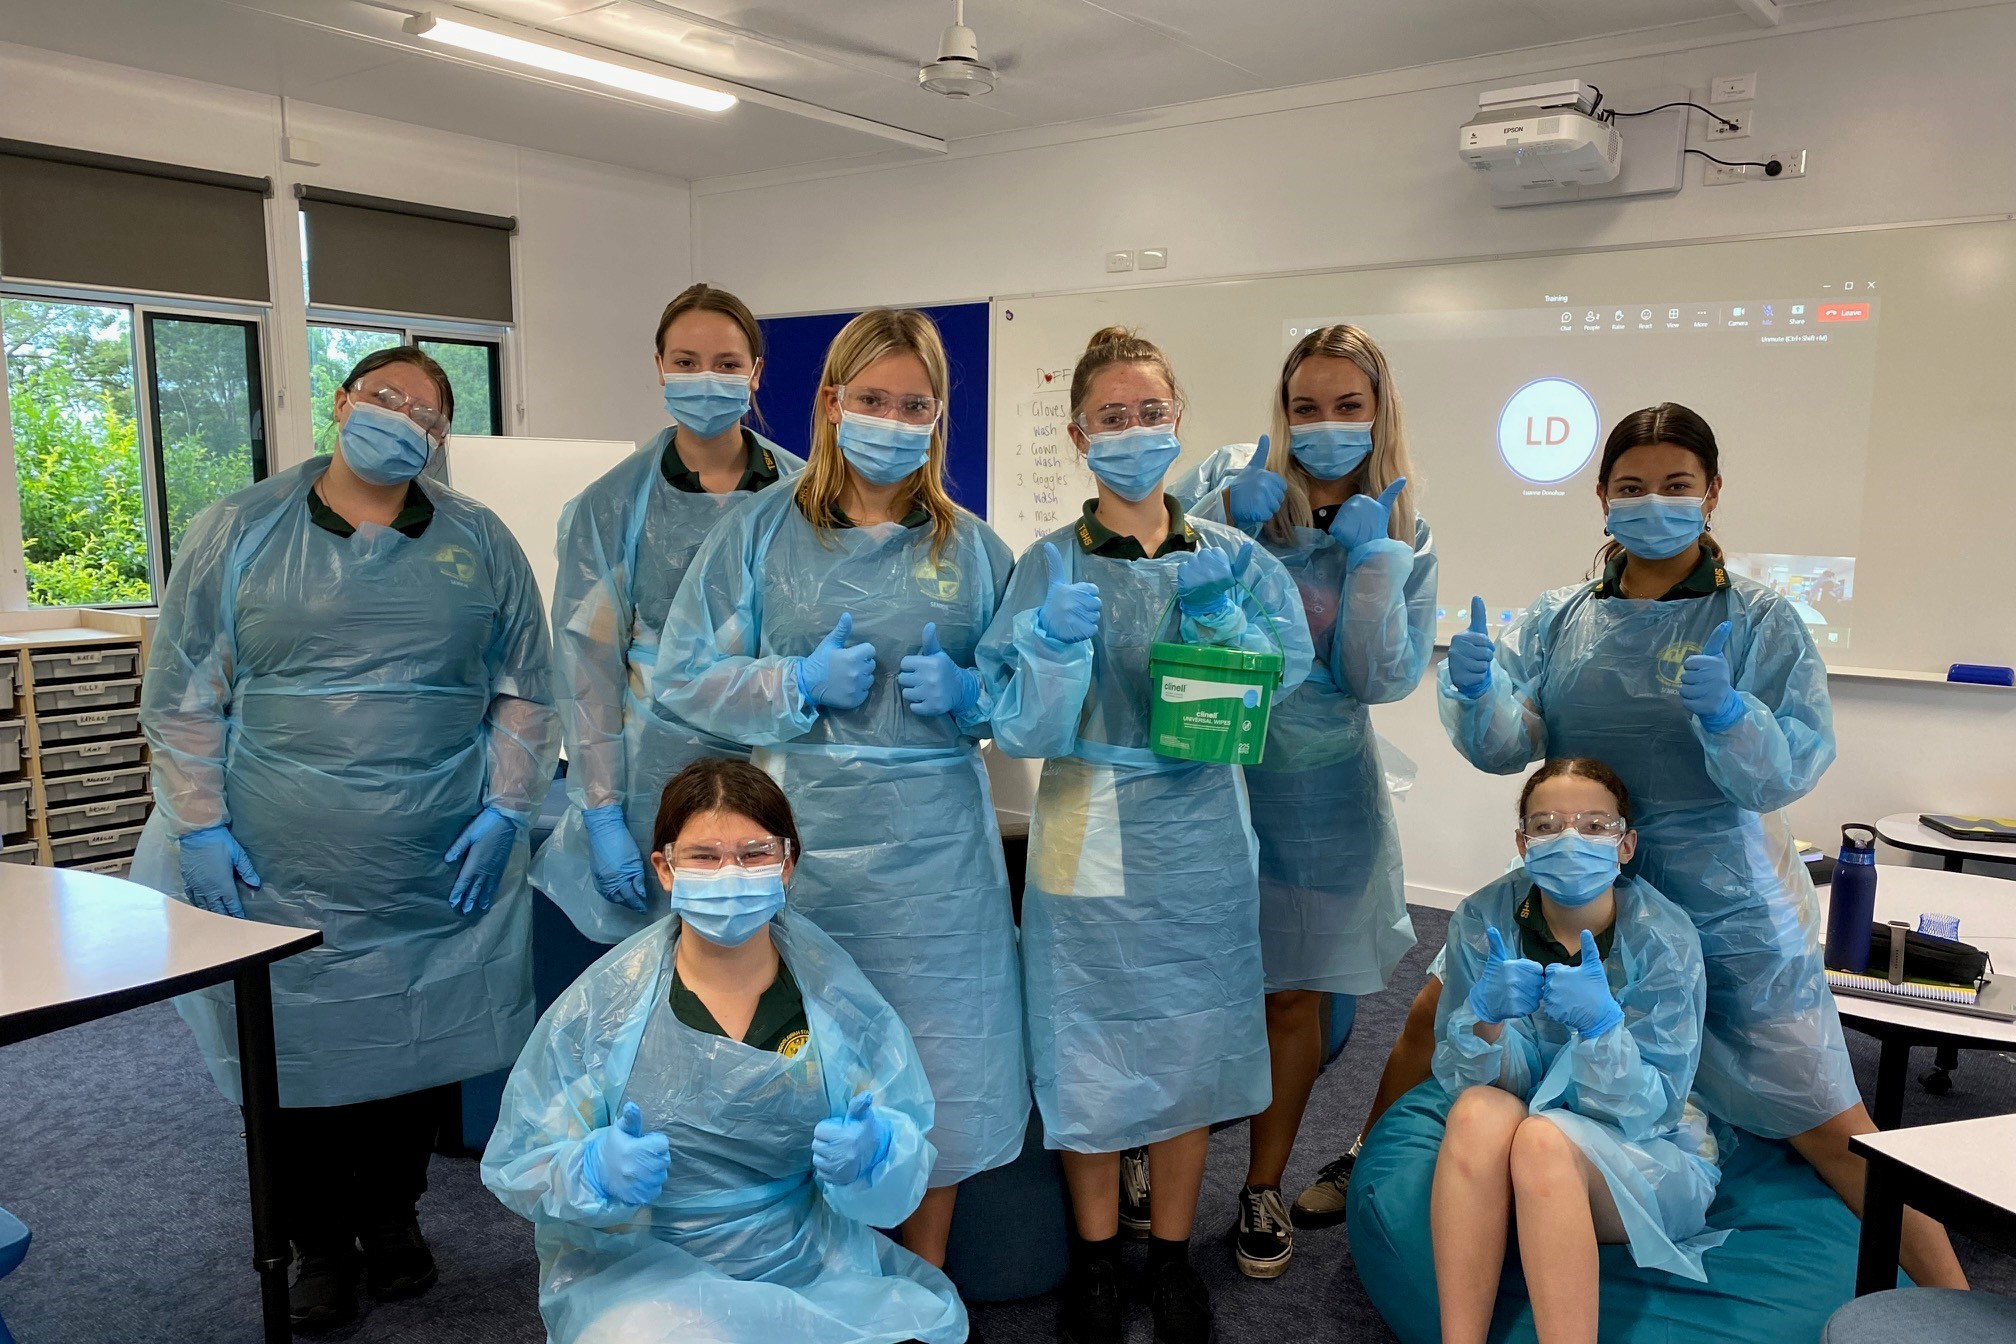 A group of students from Toogoolawah State High School is doing a new Certificate in Health course, offered through Connect ‘n’ Grow.